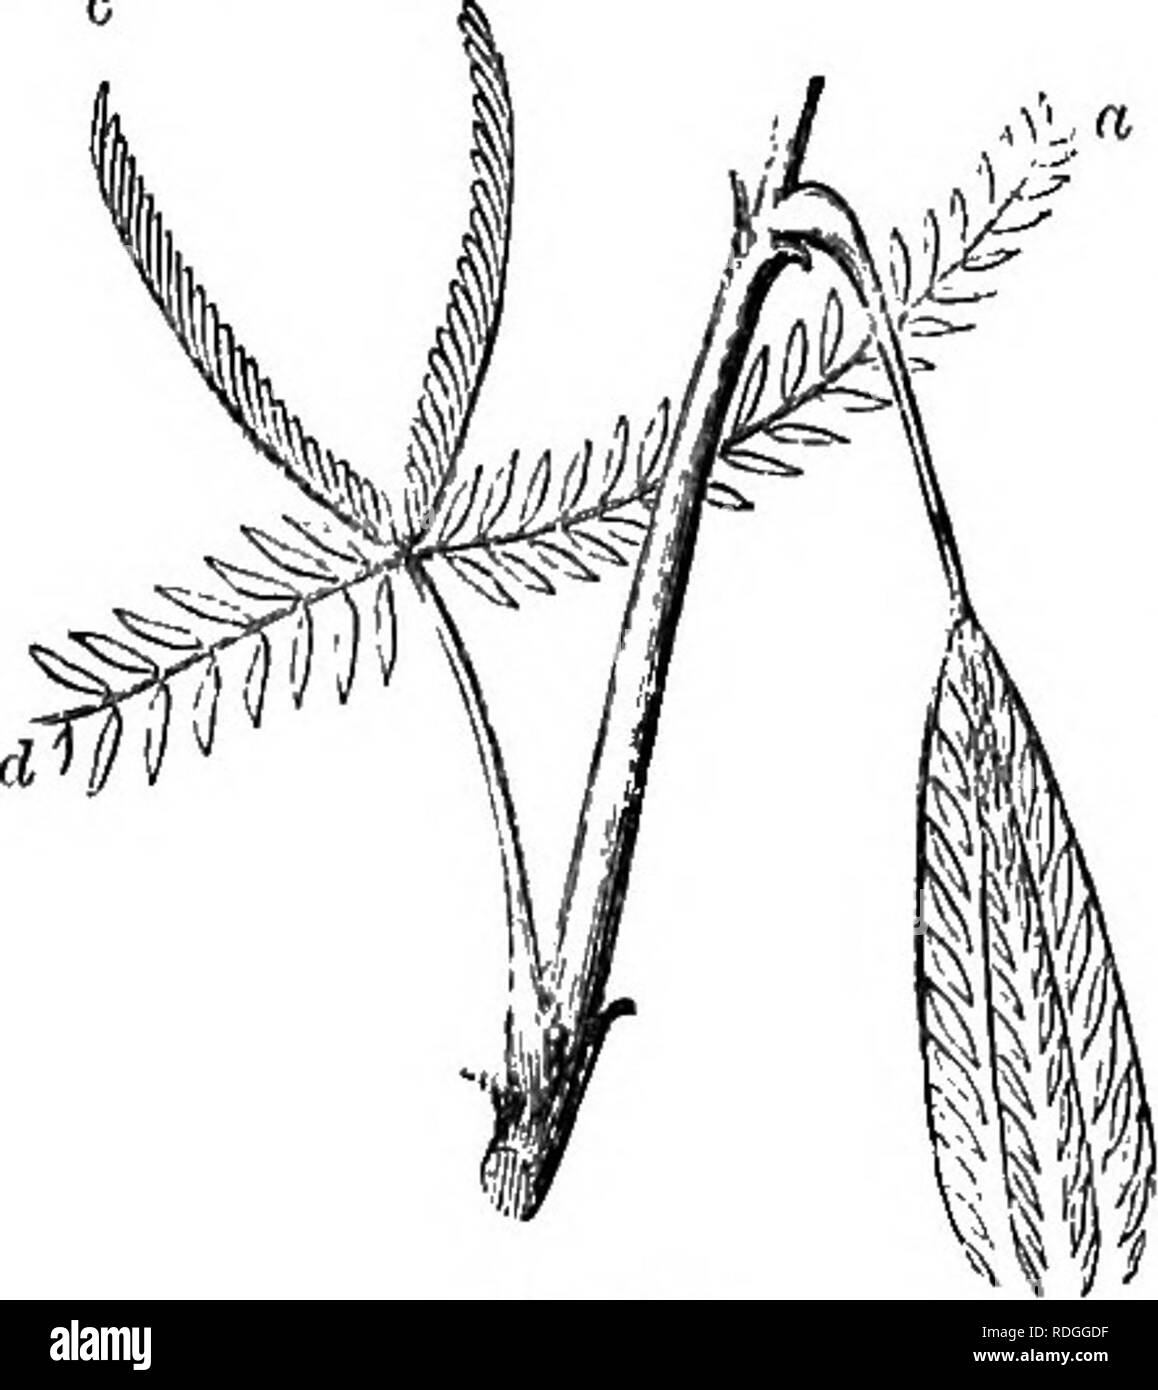 . A Manual of botany : being an introduction to the study of the structure, physiology, and classification of plants . Botany. 376 VEGETABLE lEKITABILITY.. petioles, as in tlie Sensitive plant, they may be bent inwards towards each other, while the common petiole is bent downwards. Mimosa sensitiva and pudica (fig. 657), commonly called sensitive plants, display these movements of their leaves in a remarkable degree, not only under the influence of light and darkness, but also under mechanical and other stimuli. They have bipinnate leaves with four partial petioles pro- ceeding from a common r Stock Photo